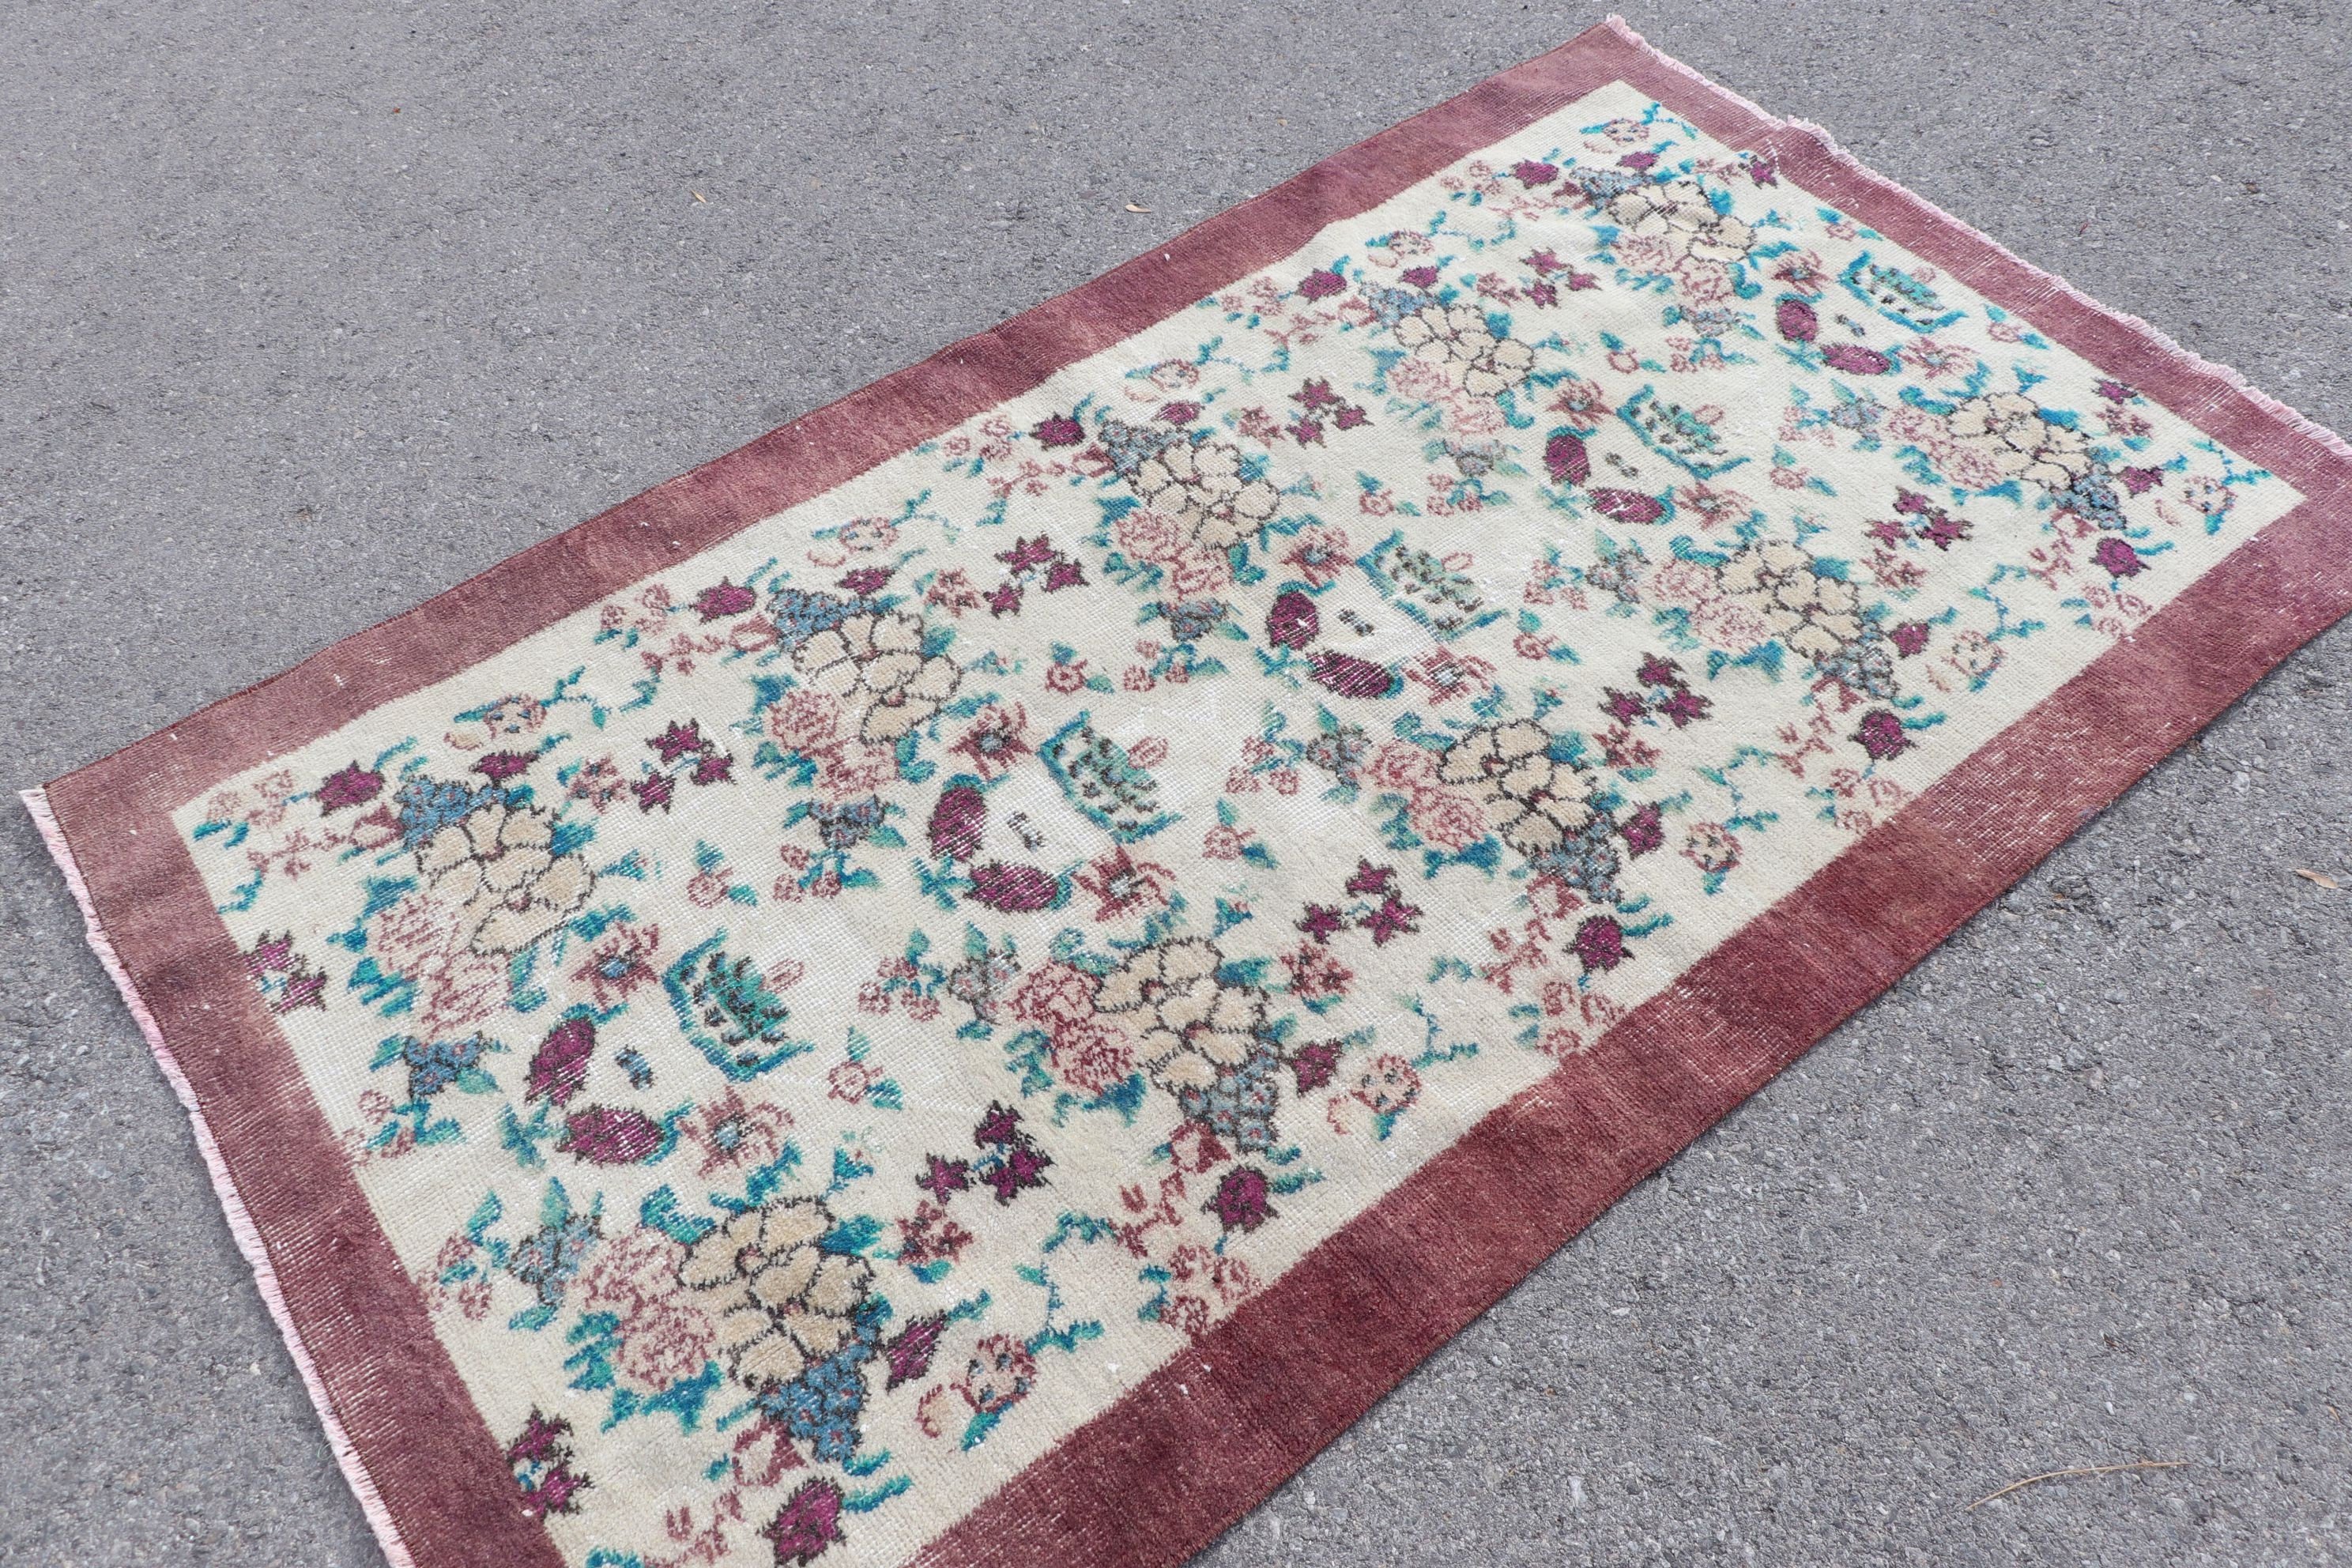 Old Rug, Turkish Rug, Antique Rugs, Vintage Rugs, Kitchen Rugs, Cool Rug, 3.5x6.3 ft Accent Rug, Rugs for Entry, Nursery Rug, Red Cool Rug